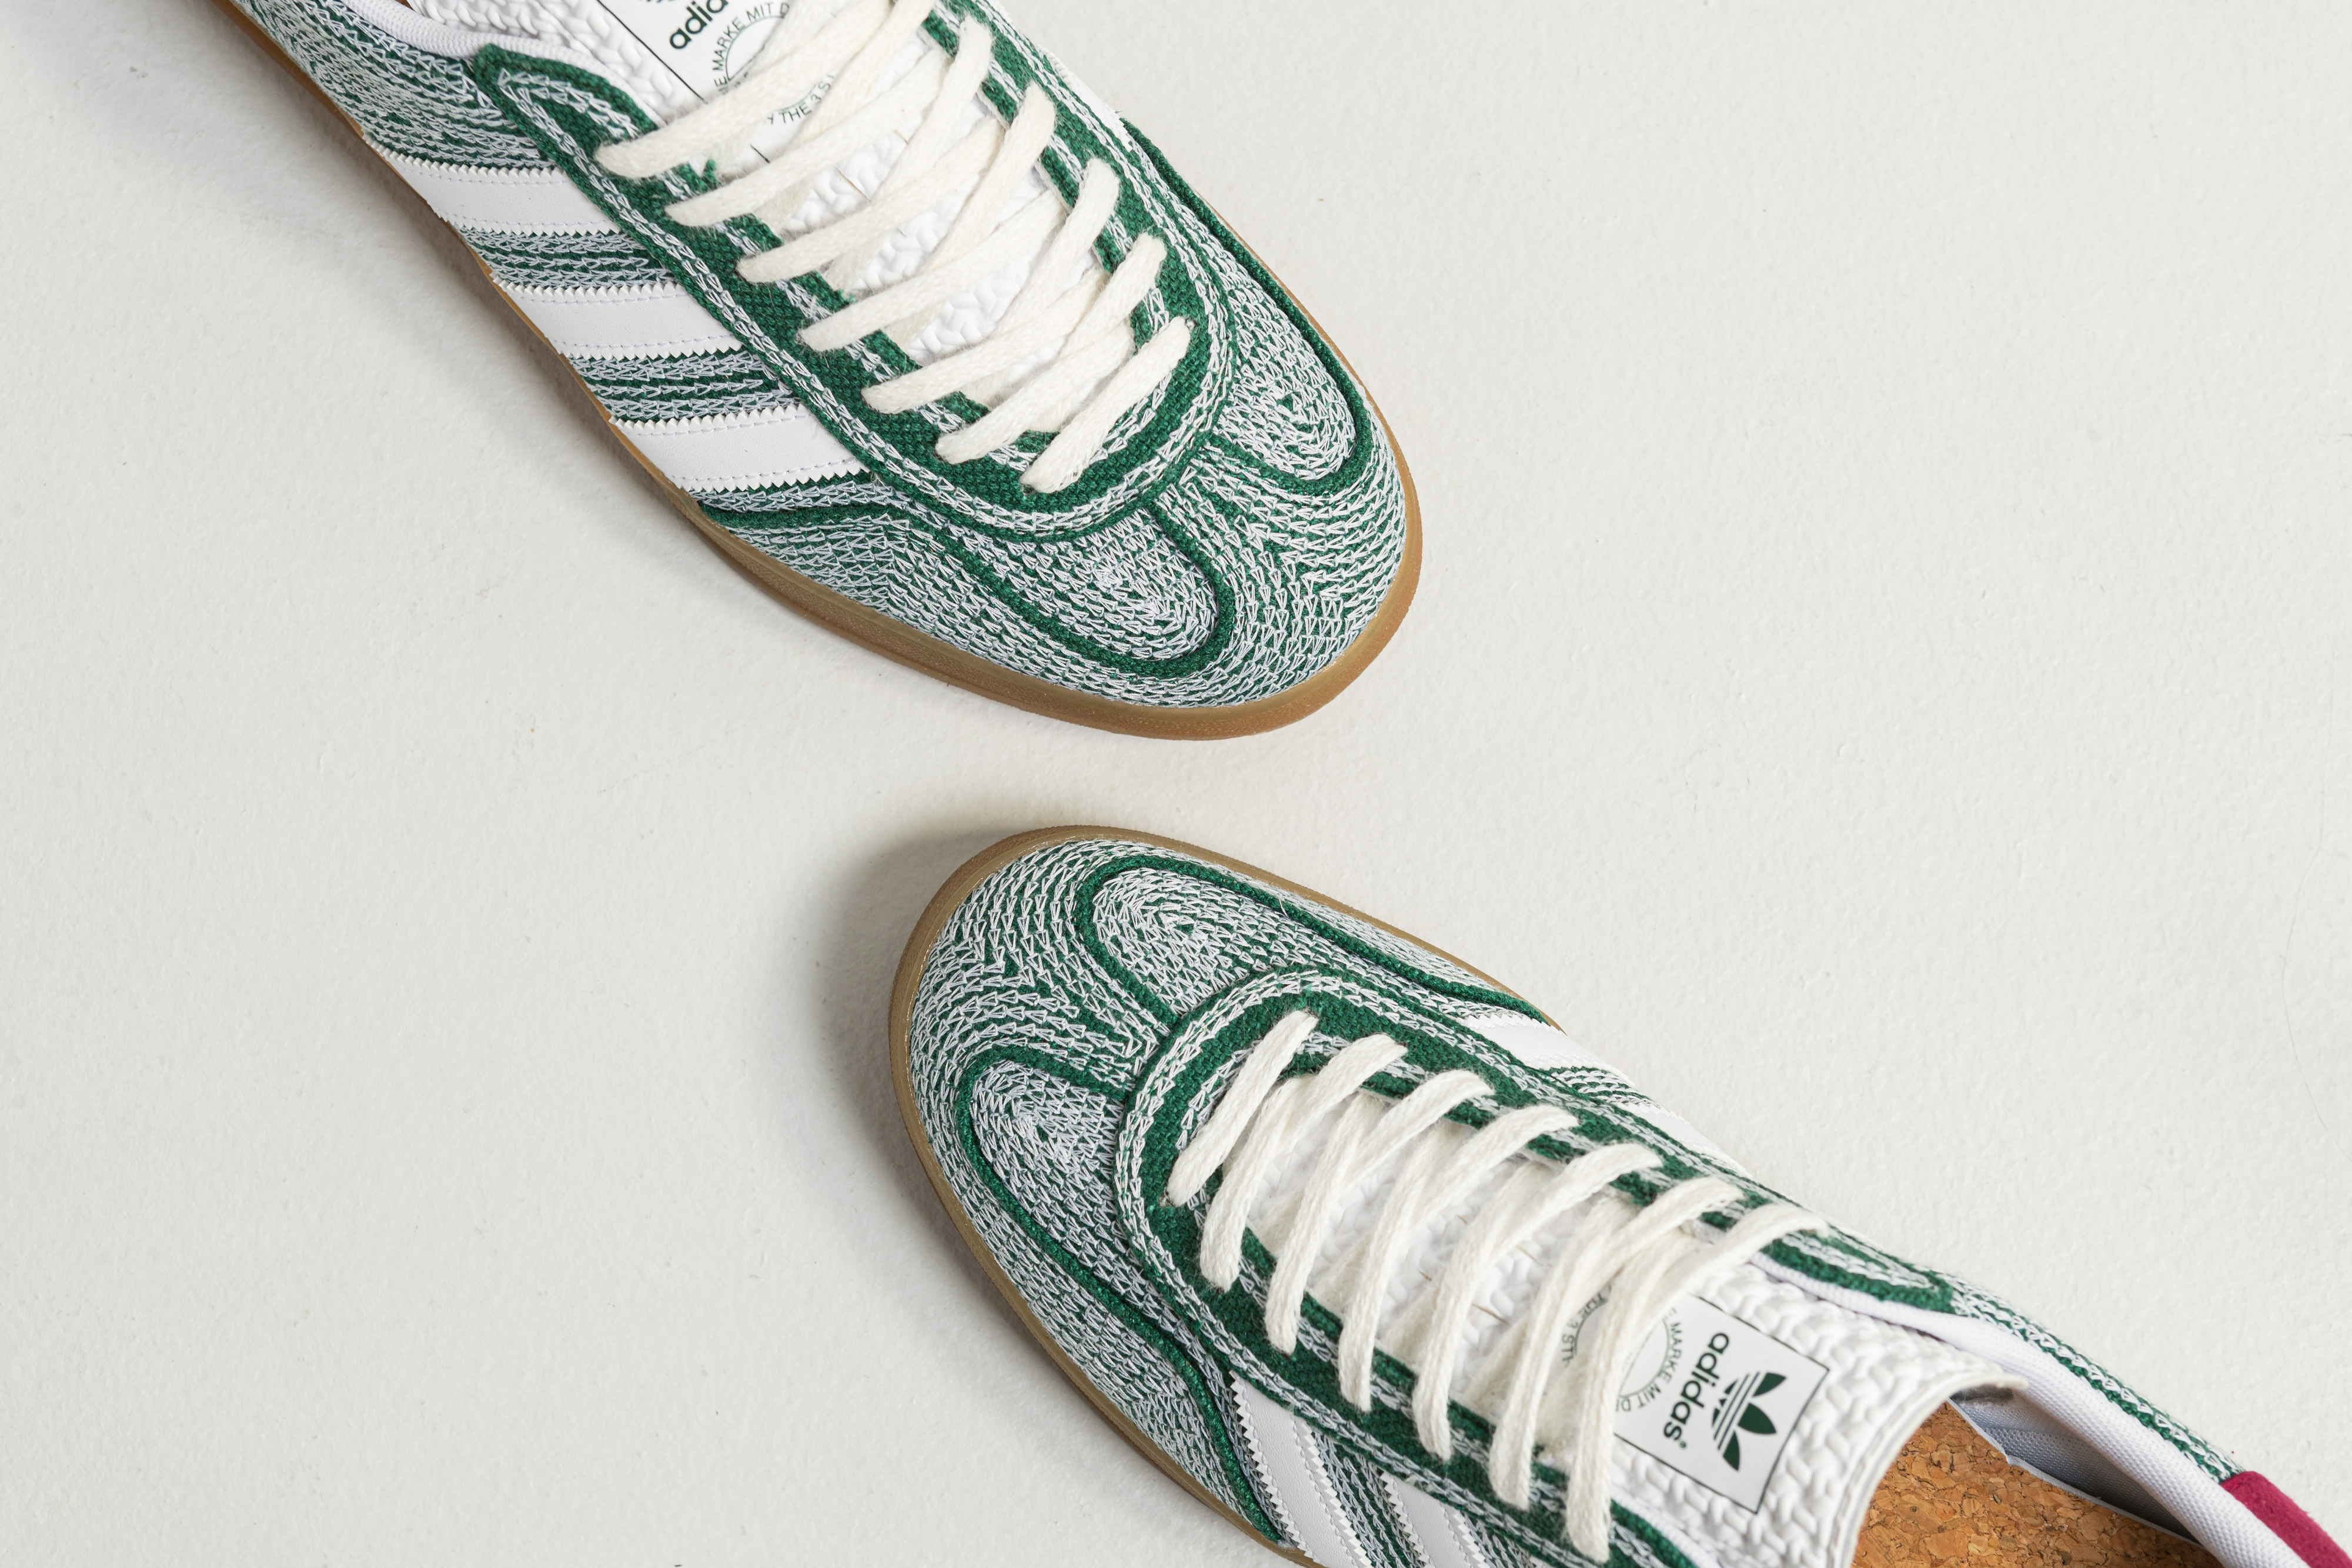 adidas - Gazelle Indoor × Sean Wotherspoon - Core Green/Footwear White-Gum - UP THERE